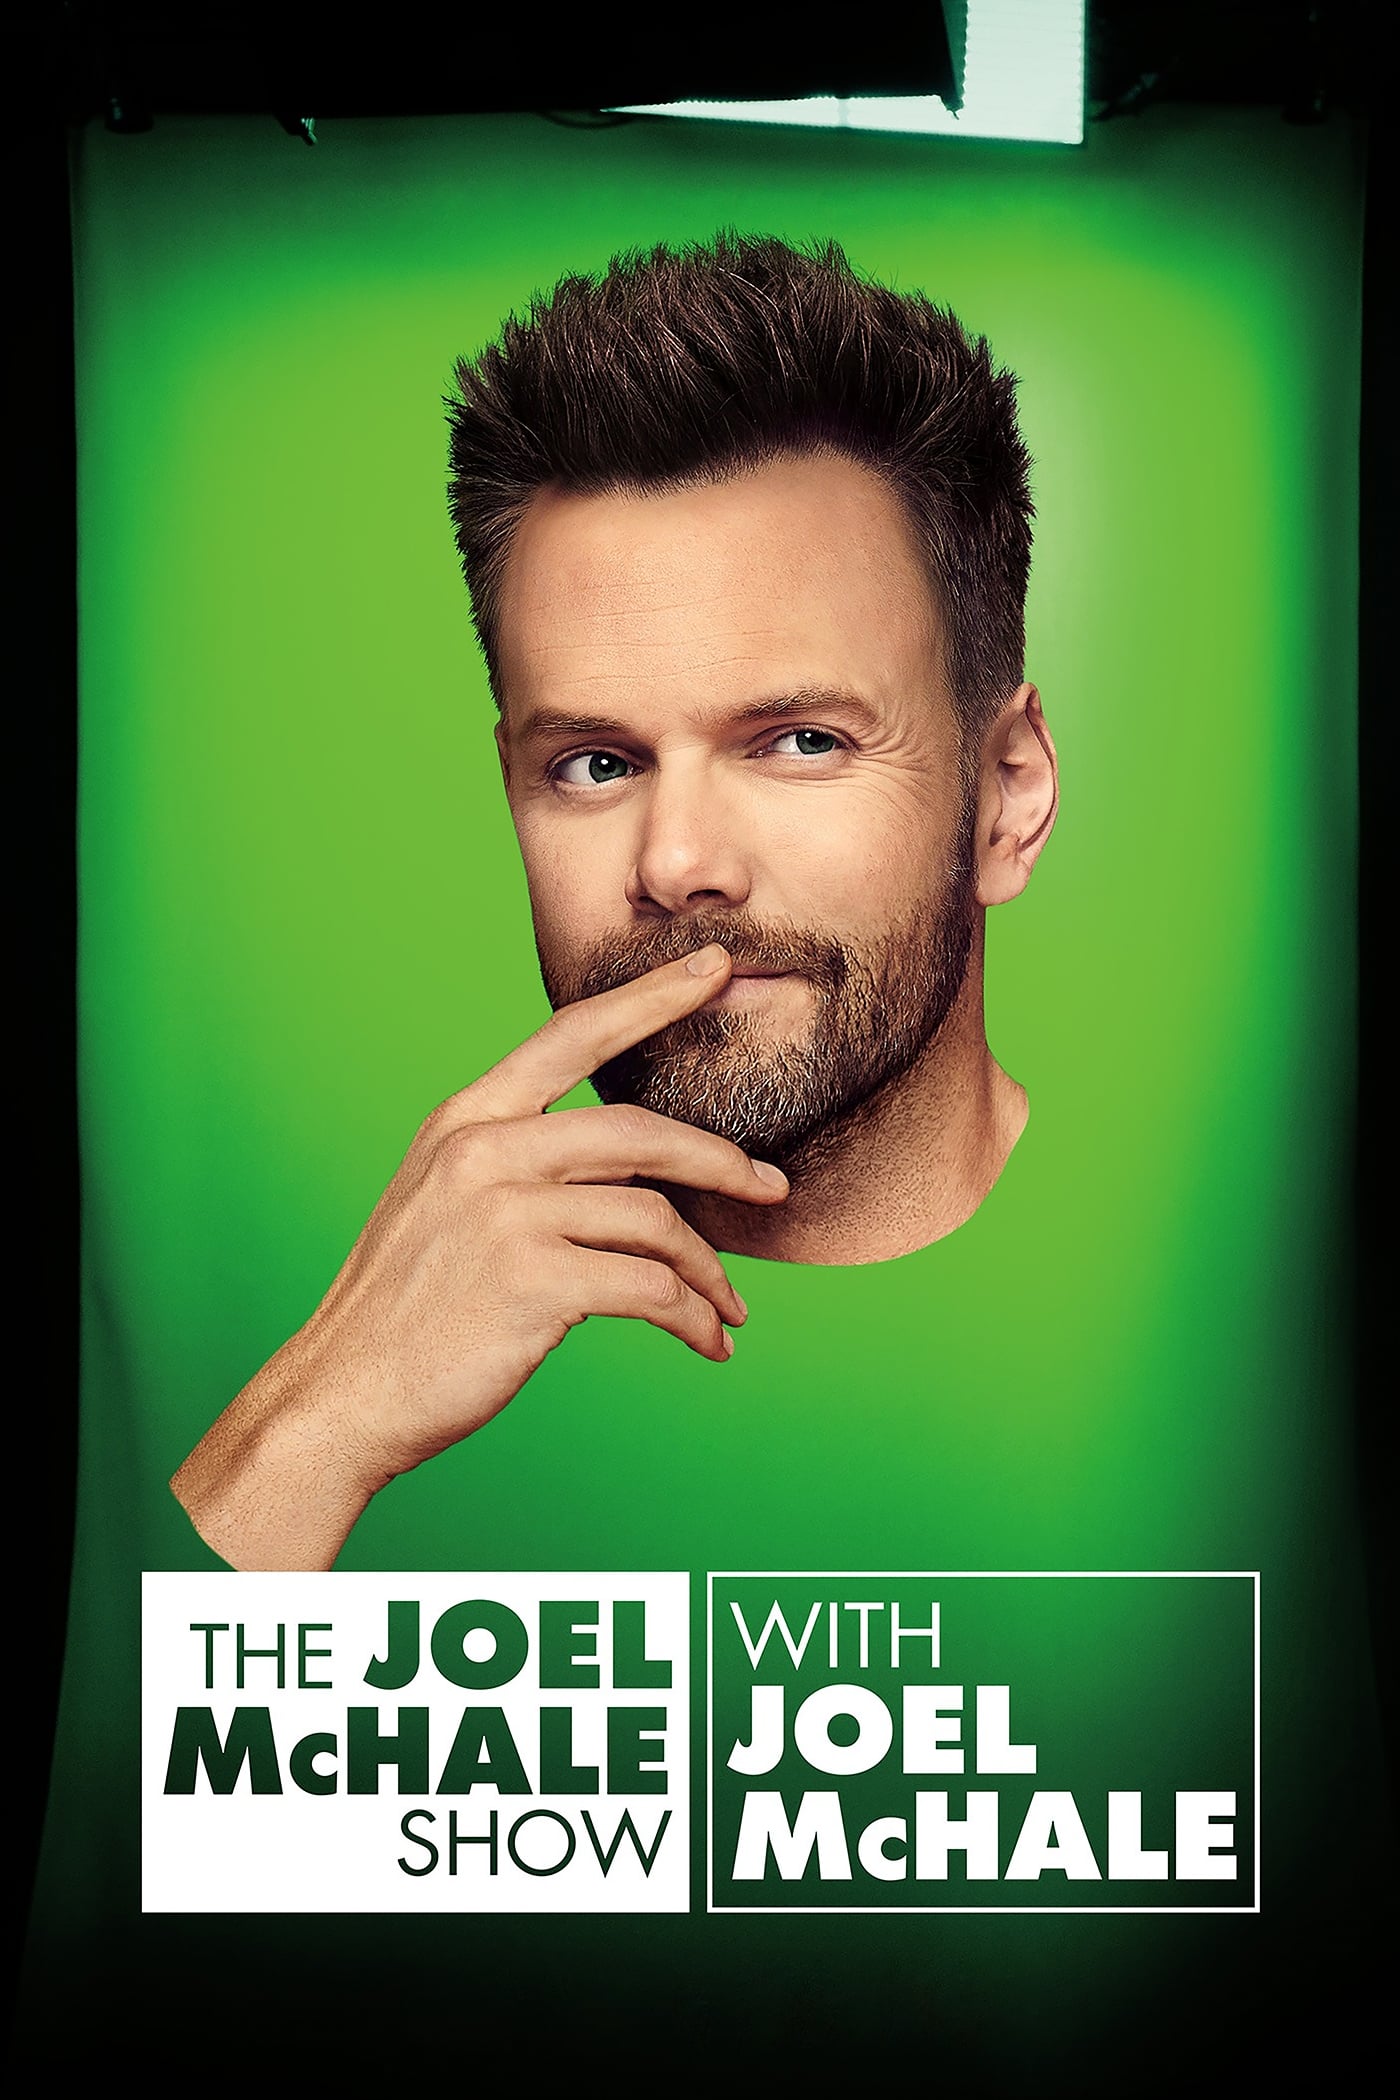 The Joel McHale Show with Joel McHale TV Shows About Social Media